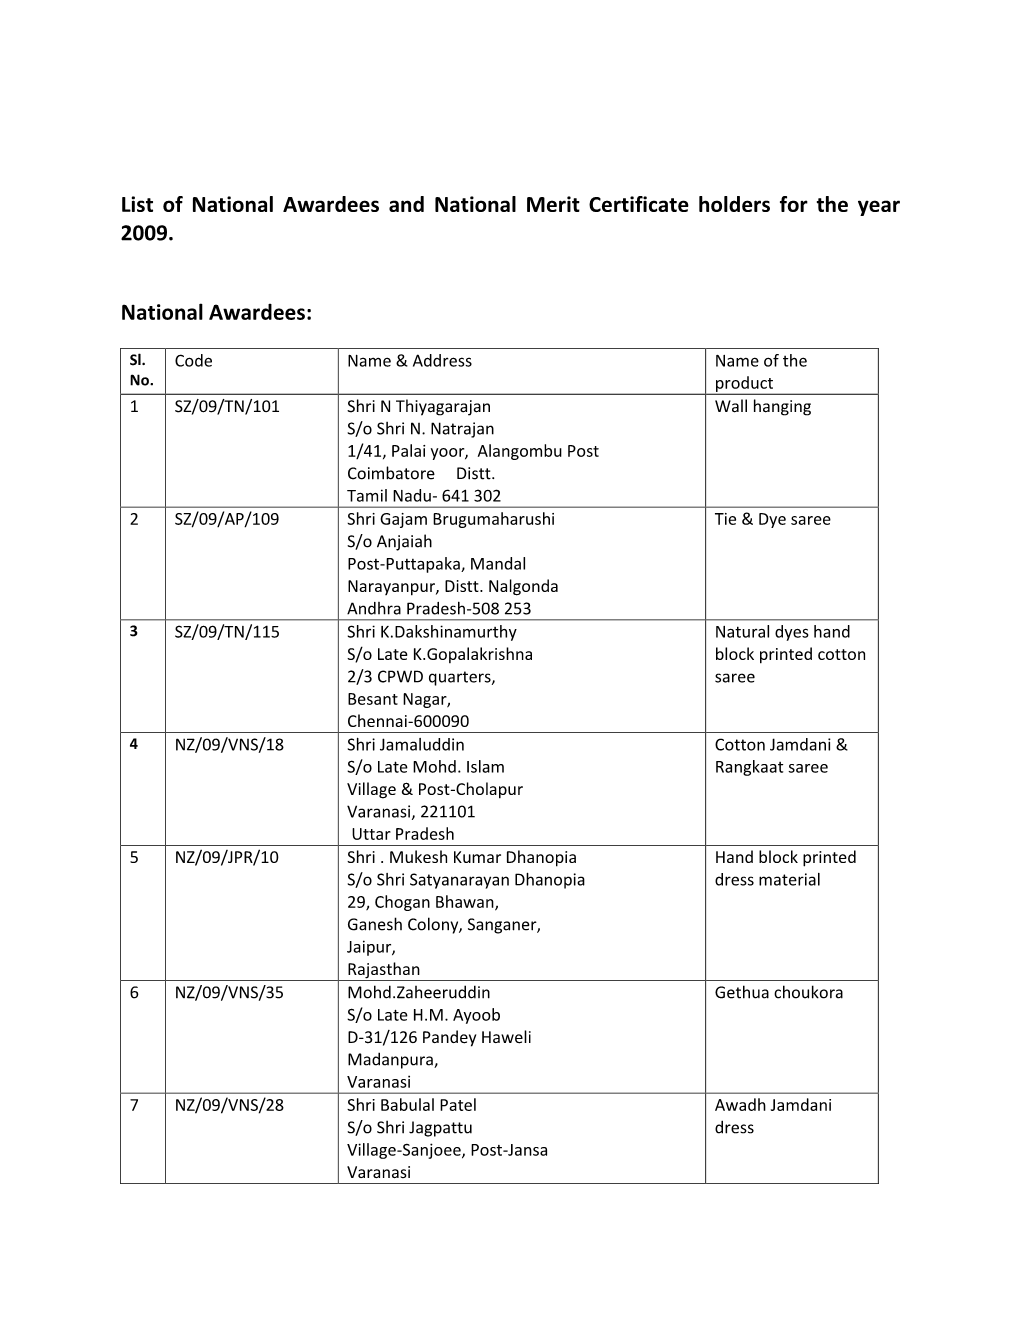 List of National Awardees and National Merit Certificate Holders for the Year 2009